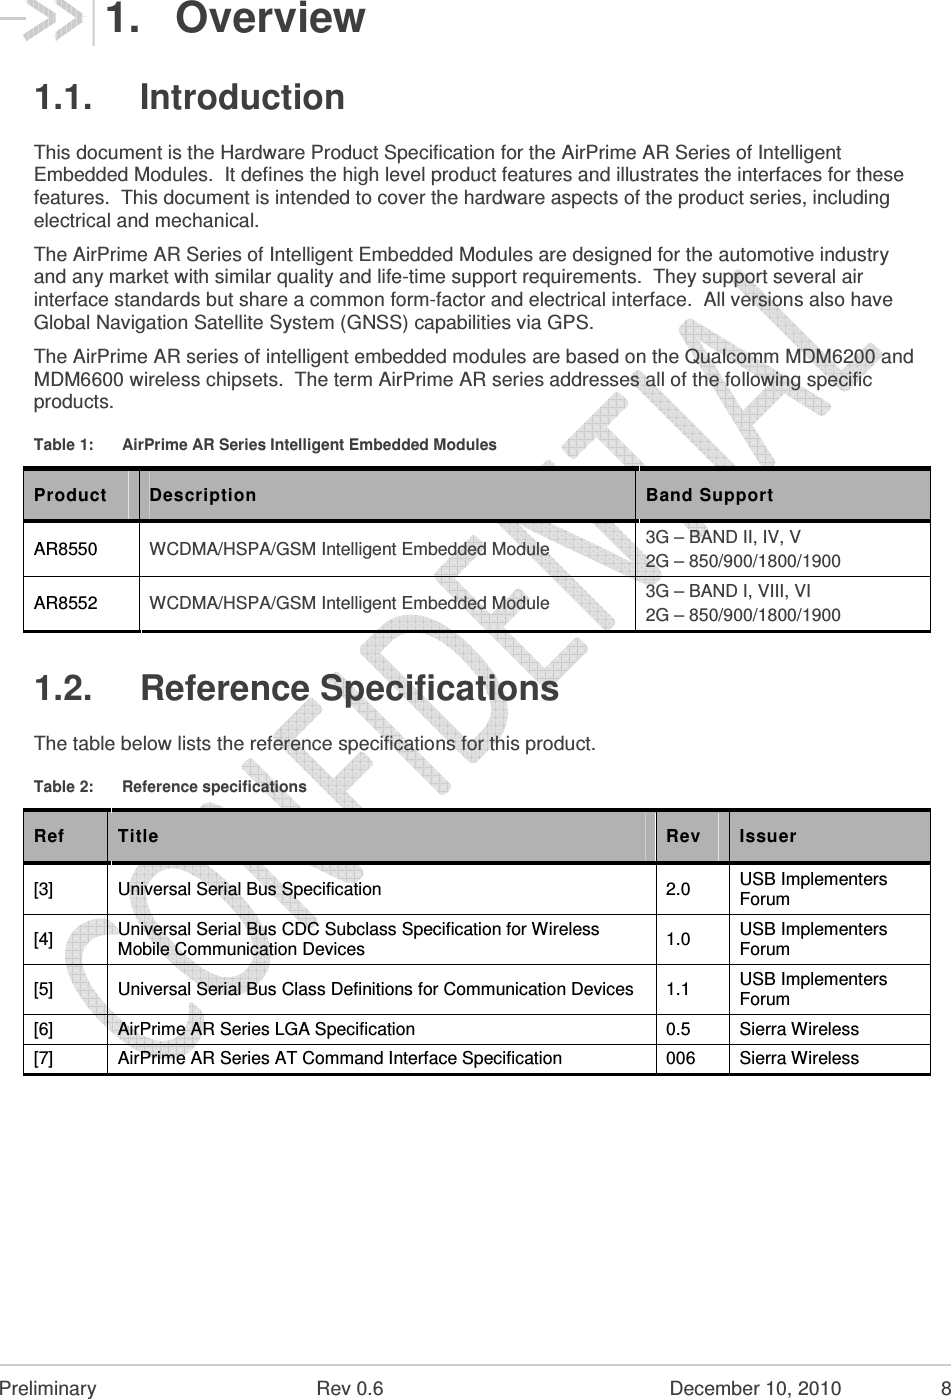  Preliminary  Rev 0.6  December 10, 2010  8 1.  Overview 1.1.  Introduction This document is the Hardware Product Specification for the AirPrime AR Series of Intelligent Embedded Modules.  It defines the high level product features and illustrates the interfaces for these features.  This document is intended to cover the hardware aspects of the product series, including electrical and mechanical. The AirPrime AR Series of Intelligent Embedded Modules are designed for the automotive industry and any market with similar quality and life-time support requirements.  They support several air interface standards but share a common form-factor and electrical interface.  All versions also have Global Navigation Satellite System (GNSS) capabilities via GPS. The AirPrime AR series of intelligent embedded modules are based on the Qualcomm MDM6200 and MDM6600 wireless chipsets.  The term AirPrime AR series addresses all of the following specific products. Table 1:  AirPrime AR Series Intelligent Embedded Modules Product  Description  Band Support AR8550  WCDMA/HSPA/GSM Intelligent Embedded Module 3G – BAND II, IV, V 2G – 850/900/1800/1900 AR8552  WCDMA/HSPA/GSM Intelligent Embedded Module 3G – BAND I, VIII, VI 2G – 850/900/1800/1900 1.2.  Reference Specifications The table below lists the reference specifications for this product. Table 2:  Reference specifications Ref  Title  Rev  Issuer [3]  Universal Serial Bus Specification  2.0  USB Implementers Forum [4]  Universal Serial Bus CDC Subclass Specification for Wireless Mobile Communication Devices  1.0  USB Implementers Forum [5]  Universal Serial Bus Class Definitions for Communication Devices  1.1  USB Implementers Forum [6]  AirPrime AR Series LGA Specification  0.5  Sierra Wireless [7]  AirPrime AR Series AT Command Interface Specification  006  Sierra Wireless  